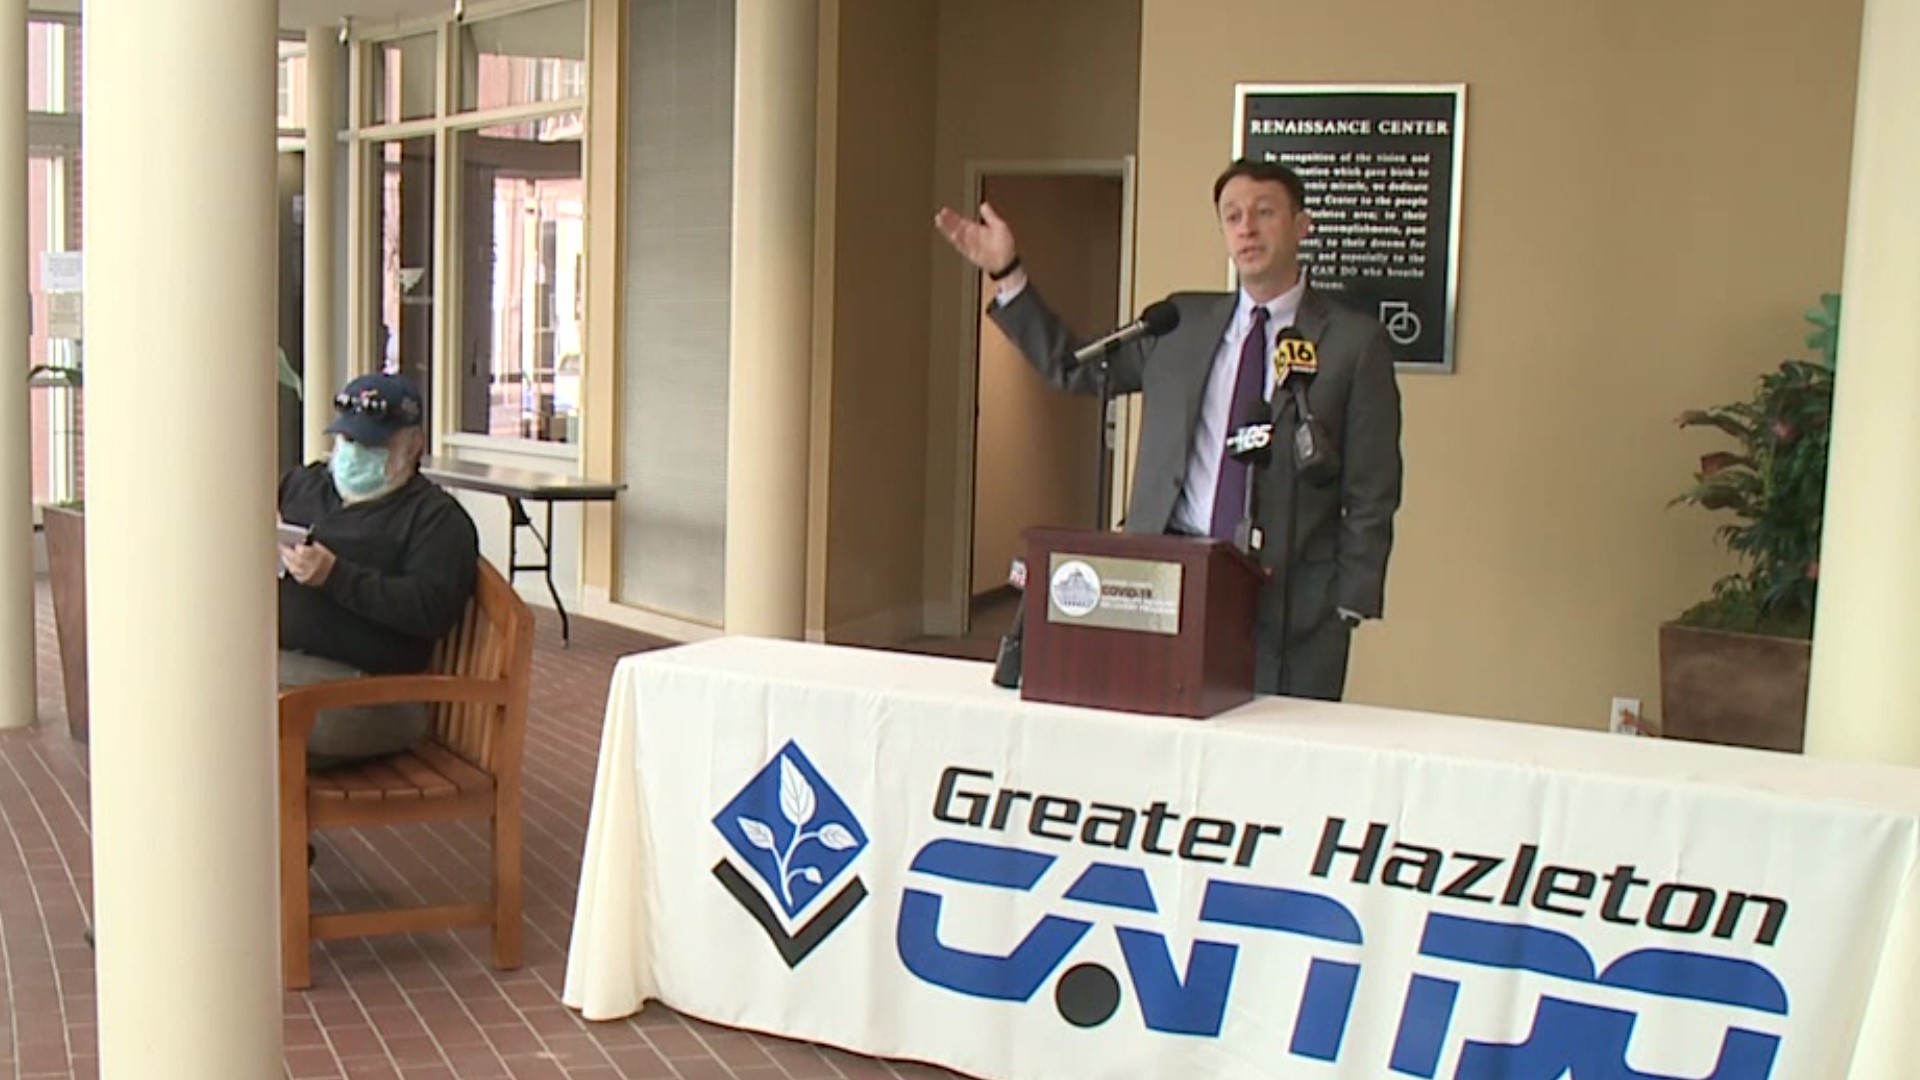 Businesses in the hospitality industry in Luzerne County will be able to get some much-needed cash.